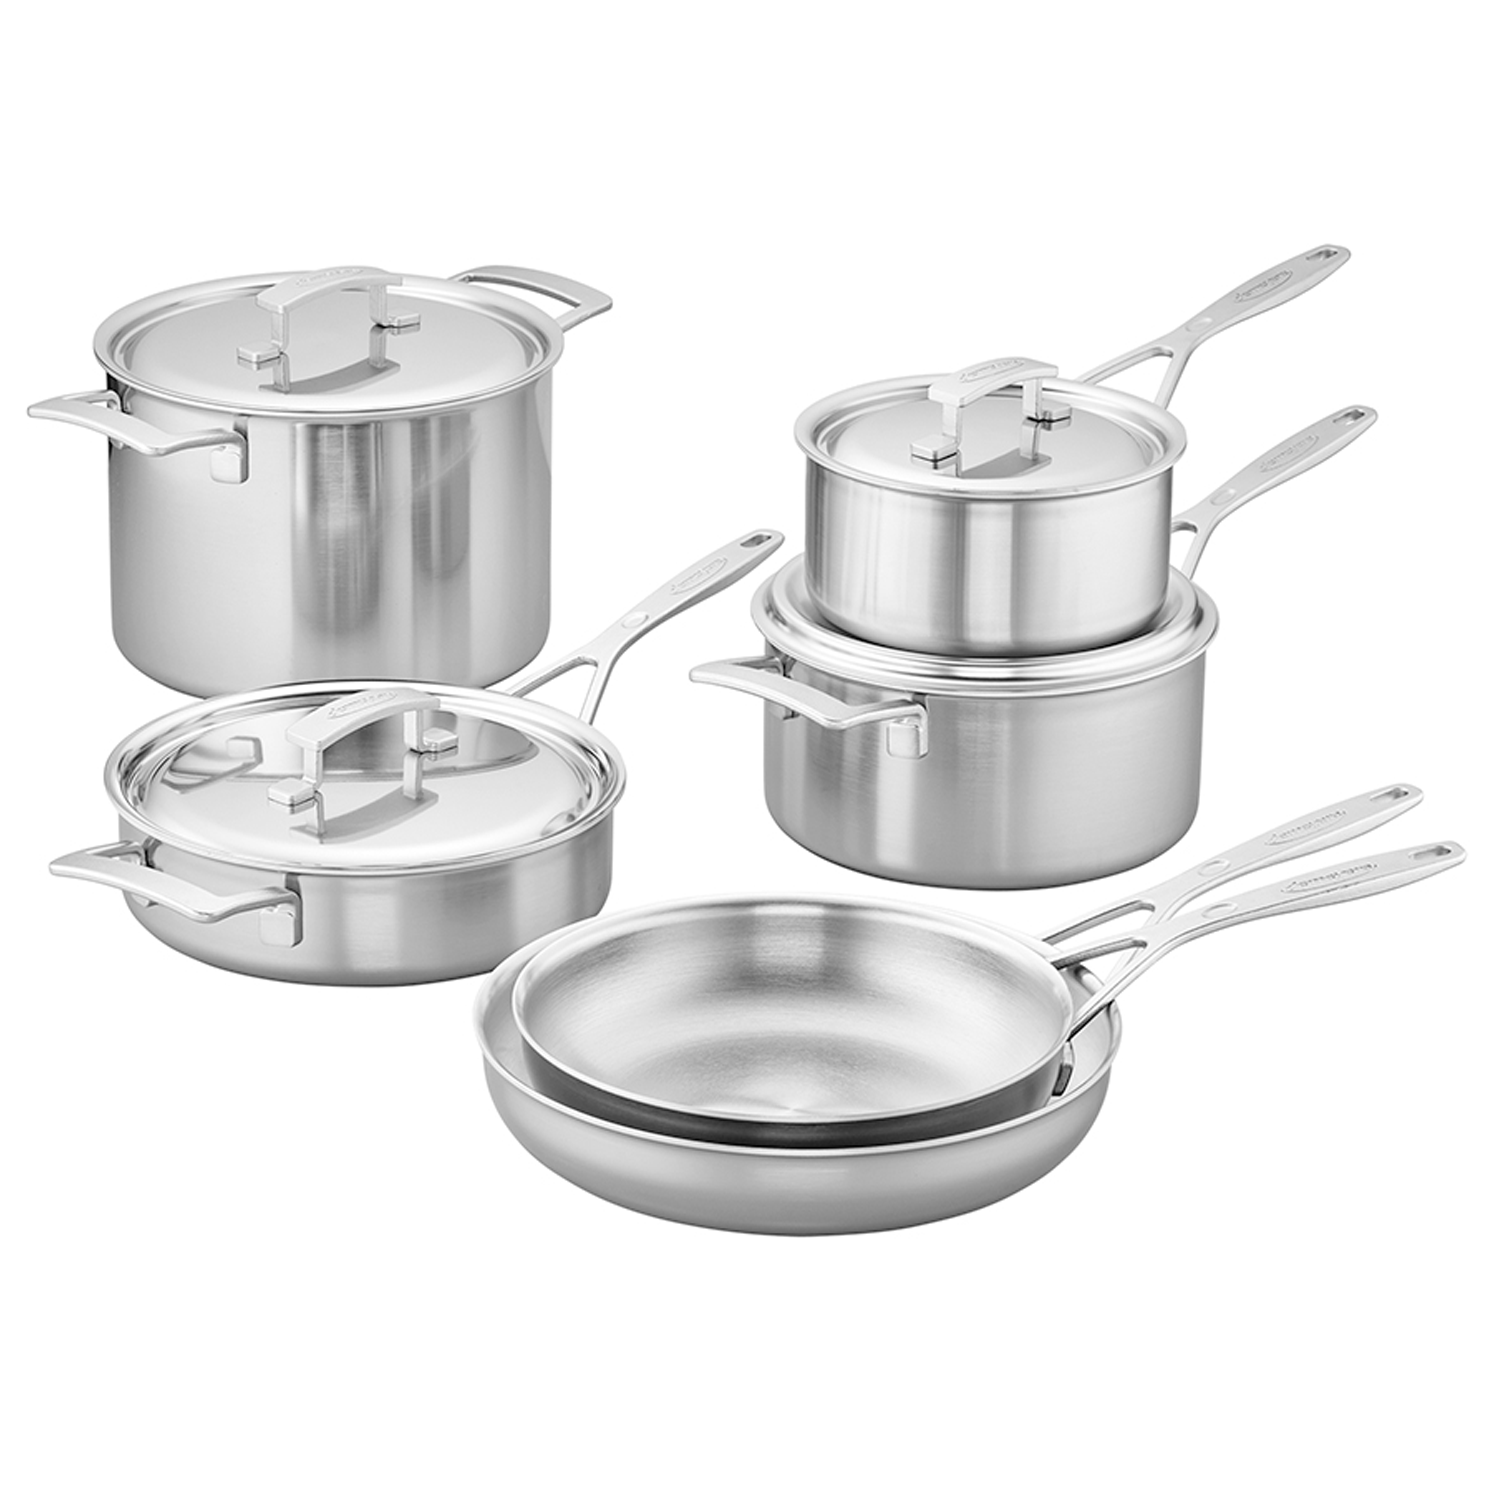 Le Chef 5-ply Stainless Steel 12 Piece Cookware Set. Clearance Sale!